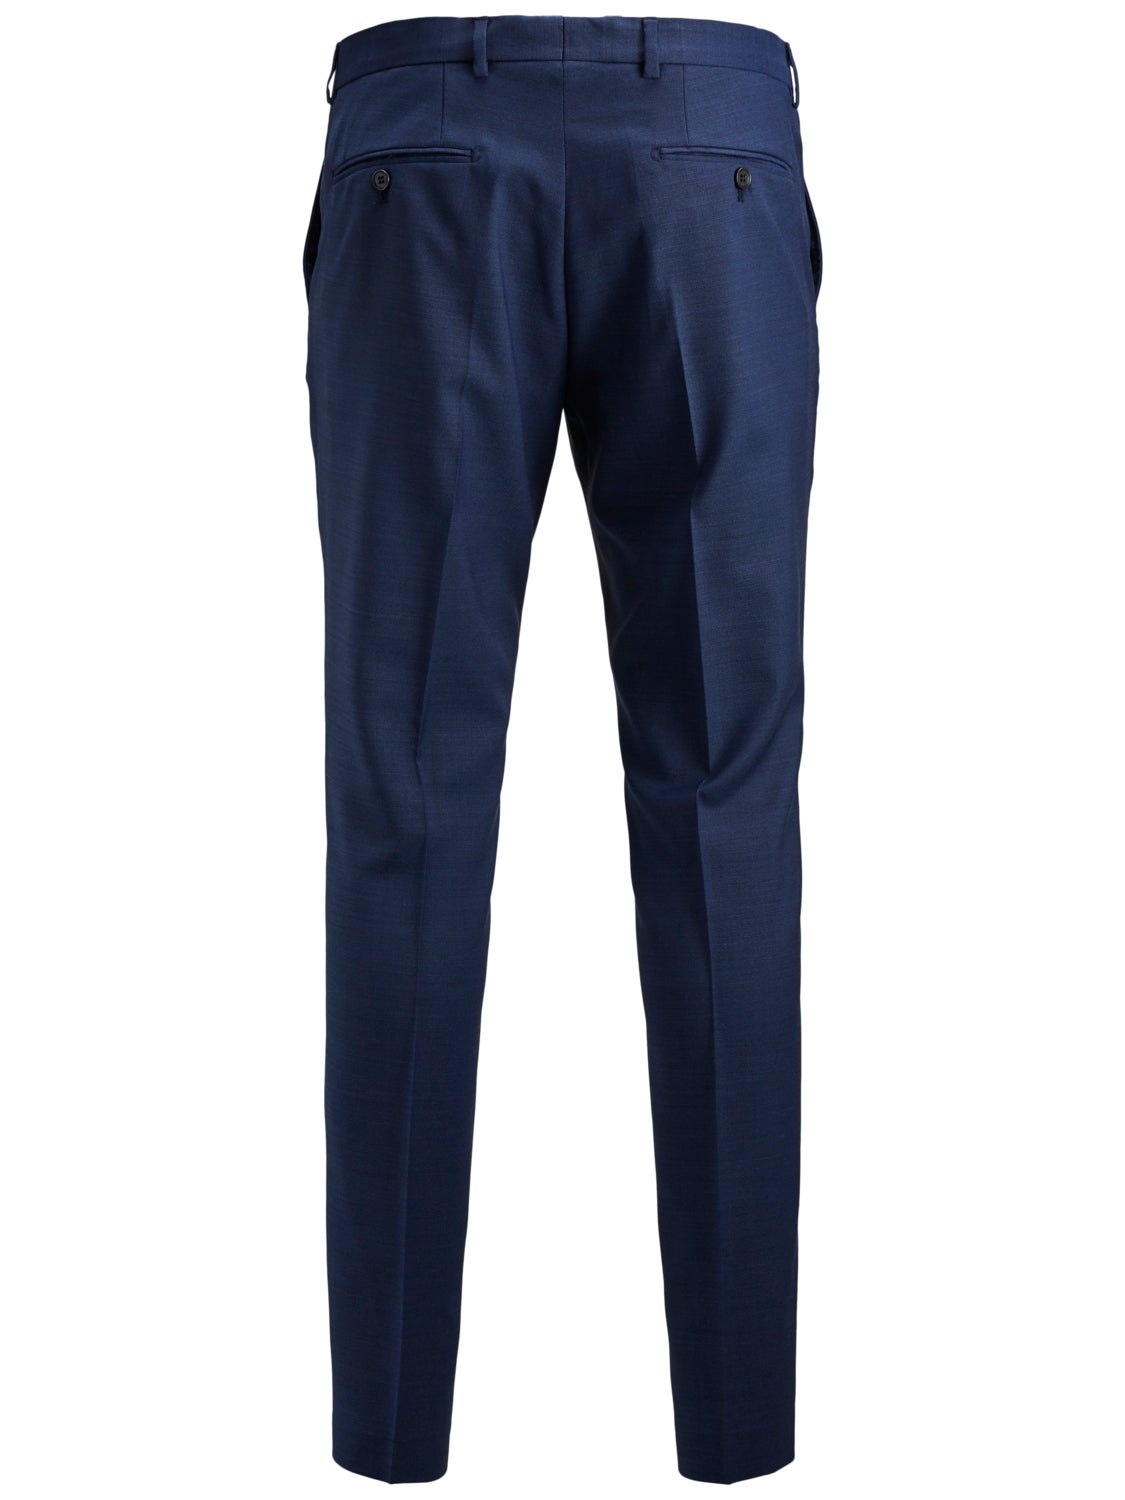 Jack & Jones Denim Premium Slim Fit Stretch Suit Trousers in Blue for Men Mens Clothing Trousers Slacks and Chinos Formal trousers 